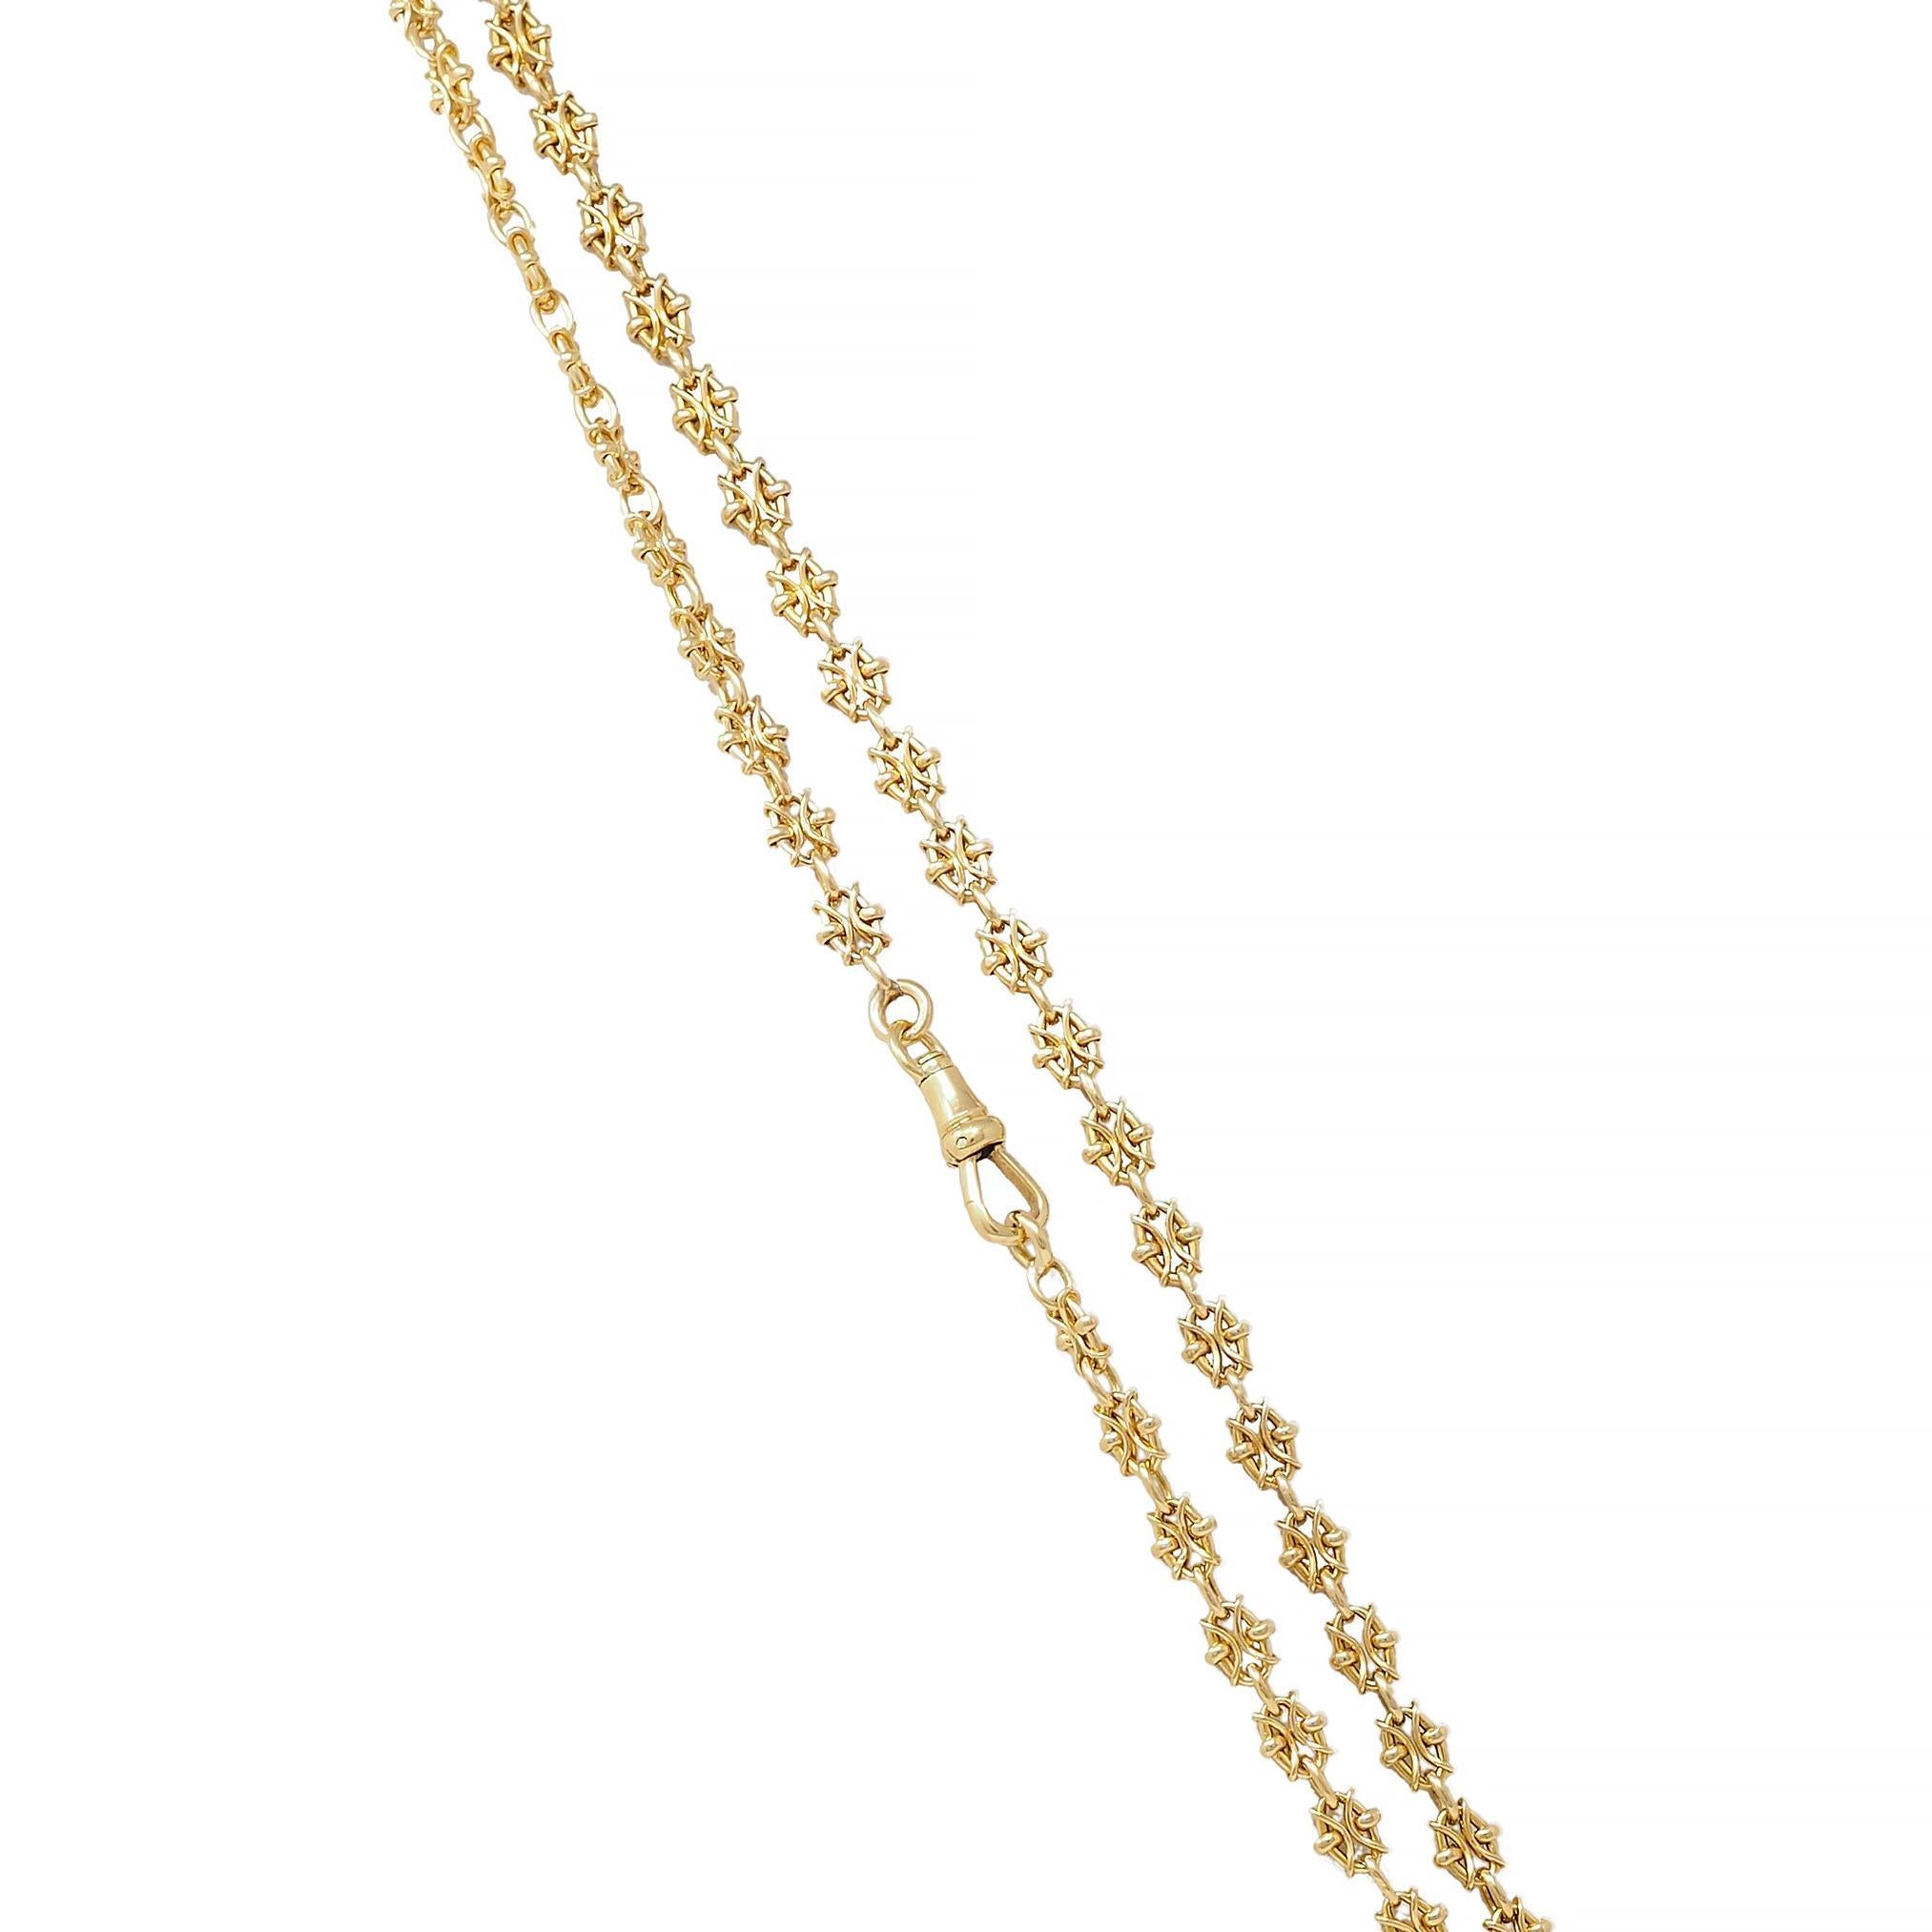 Victorian French 18 Karat Yellow Gold Fancy Link 61 IN Antique Chain Necklace For Sale 2